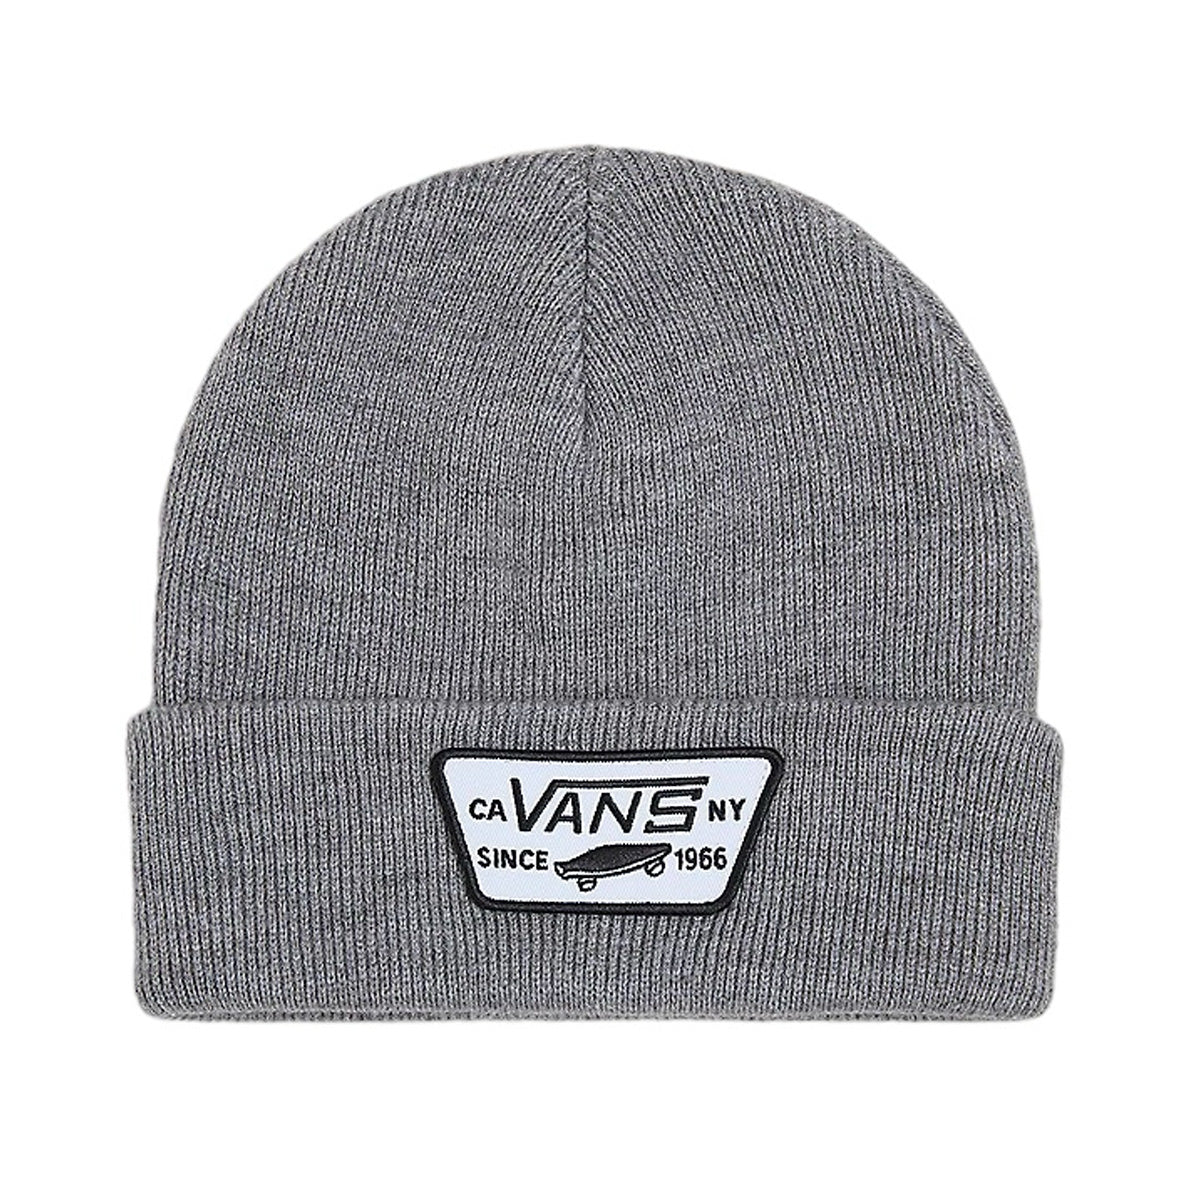 Grey vans cuffed and ribbed beanie with black and white vans patch logo on front. Free uk shipping over £50